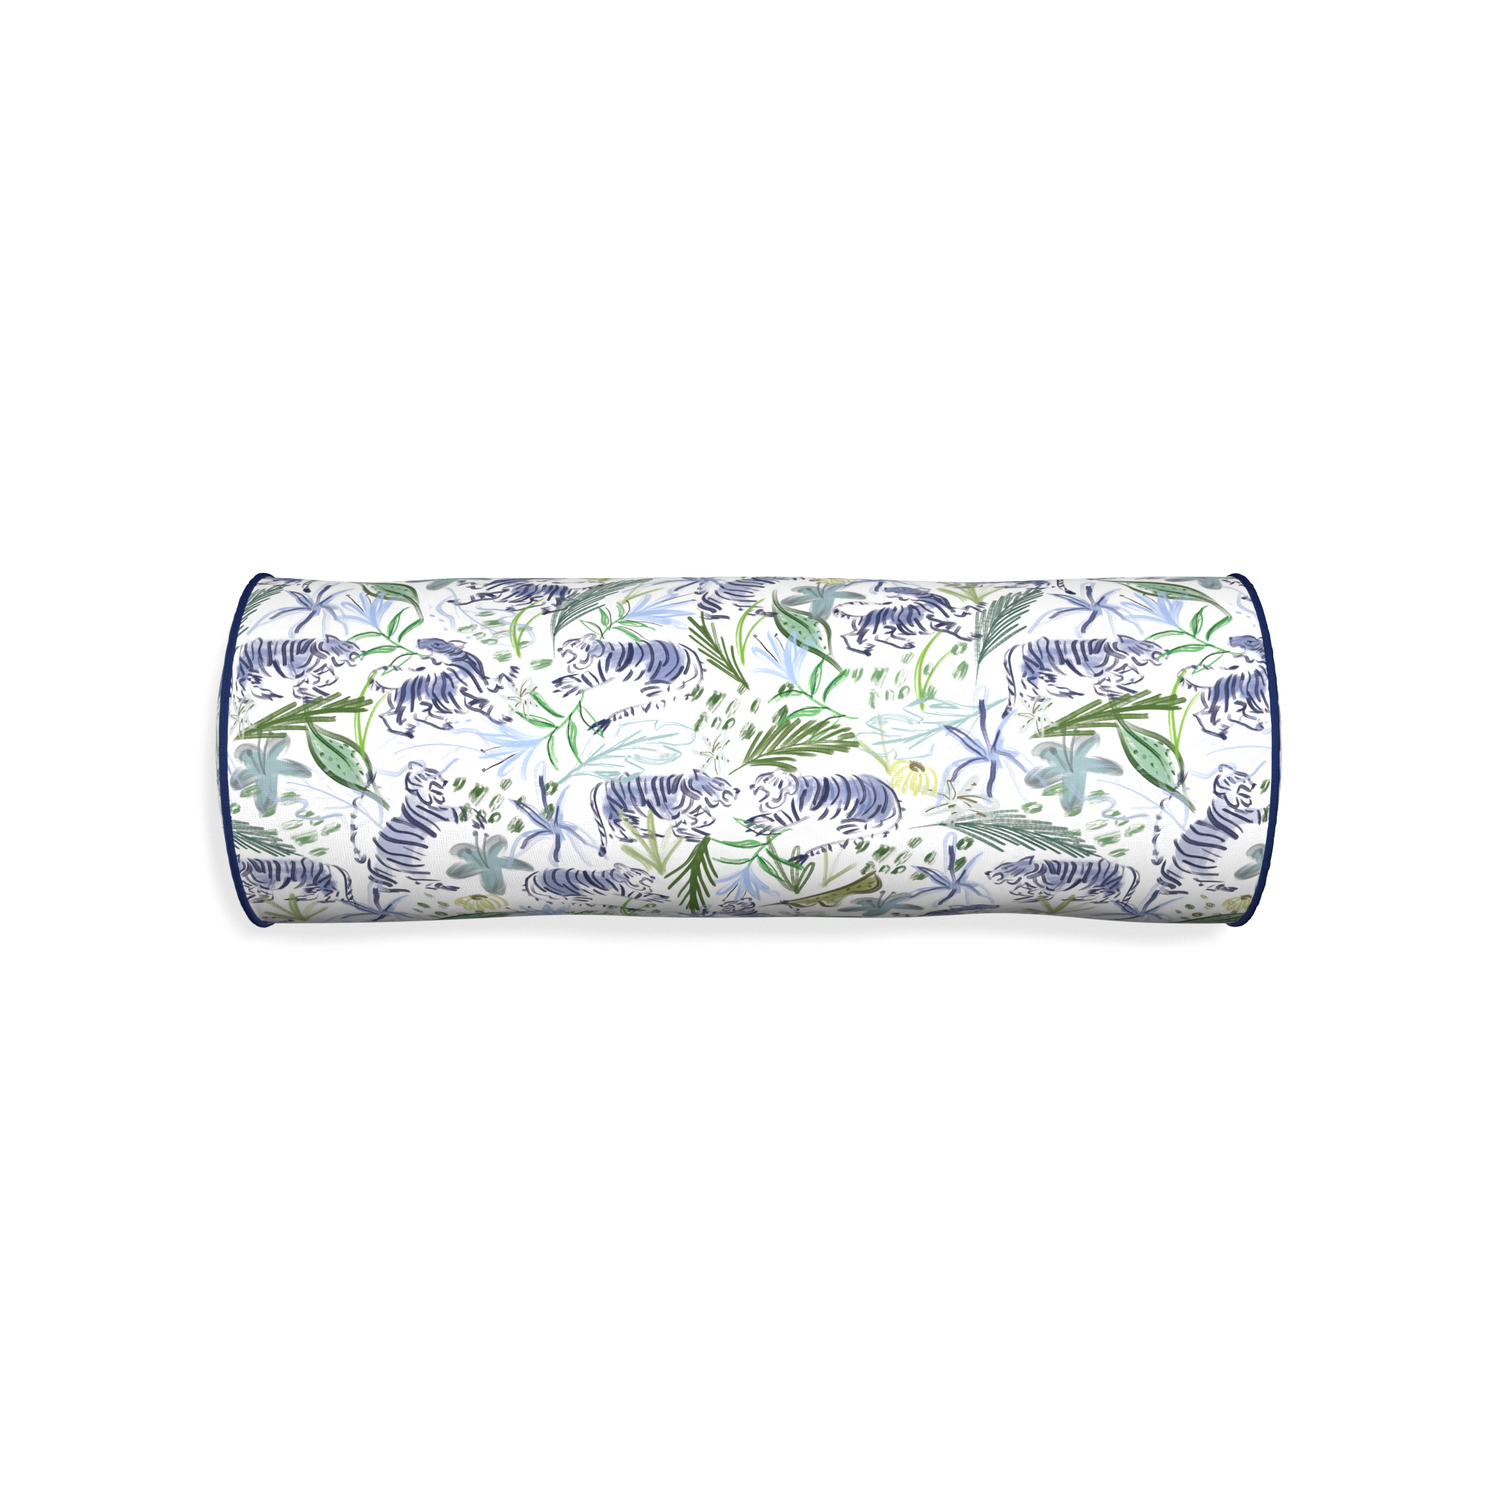 Bolster frida green custom pillow with midnight piping on white background